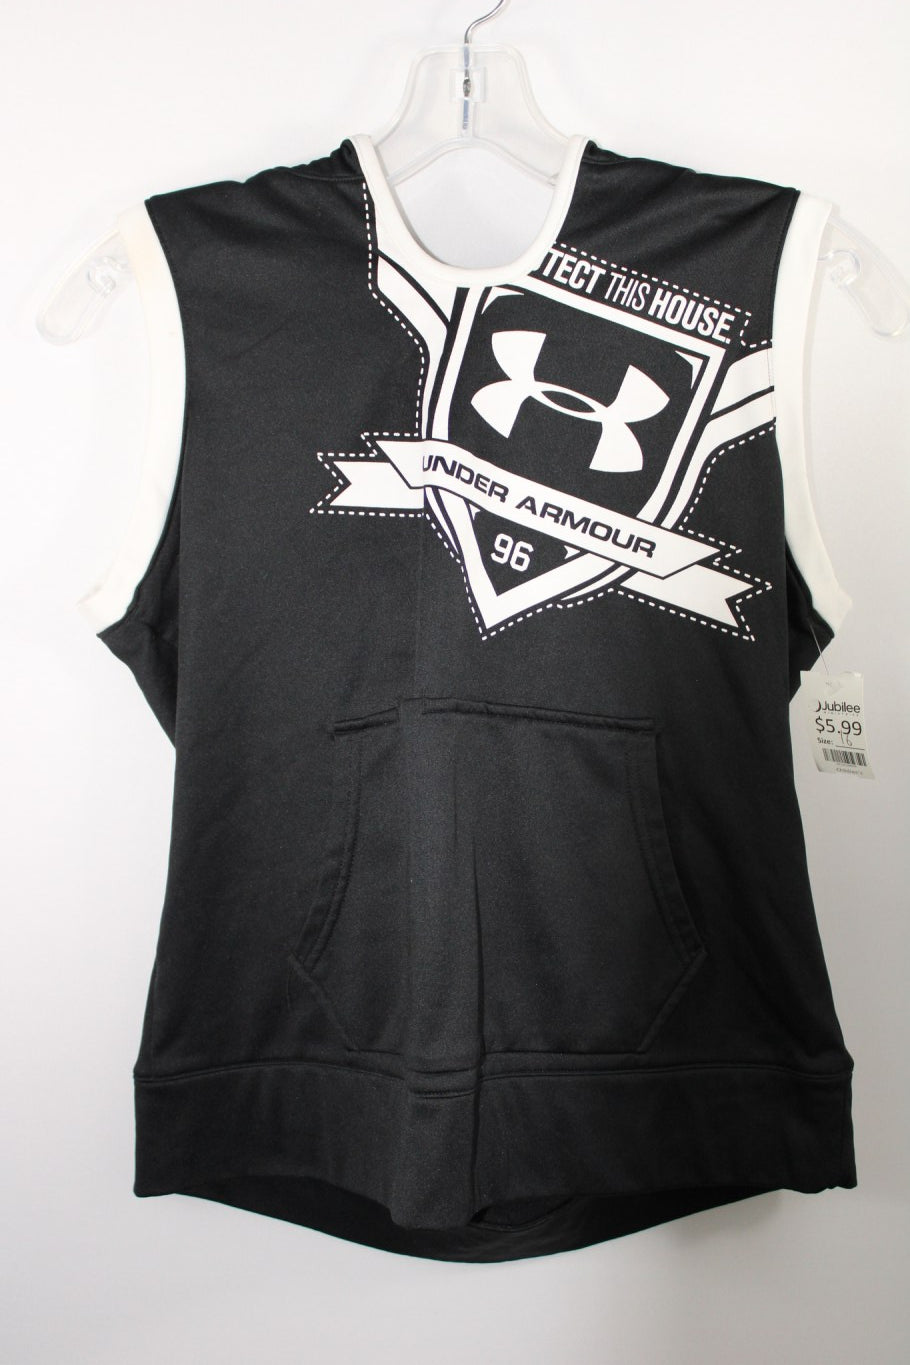 Under Armour | Youth XL